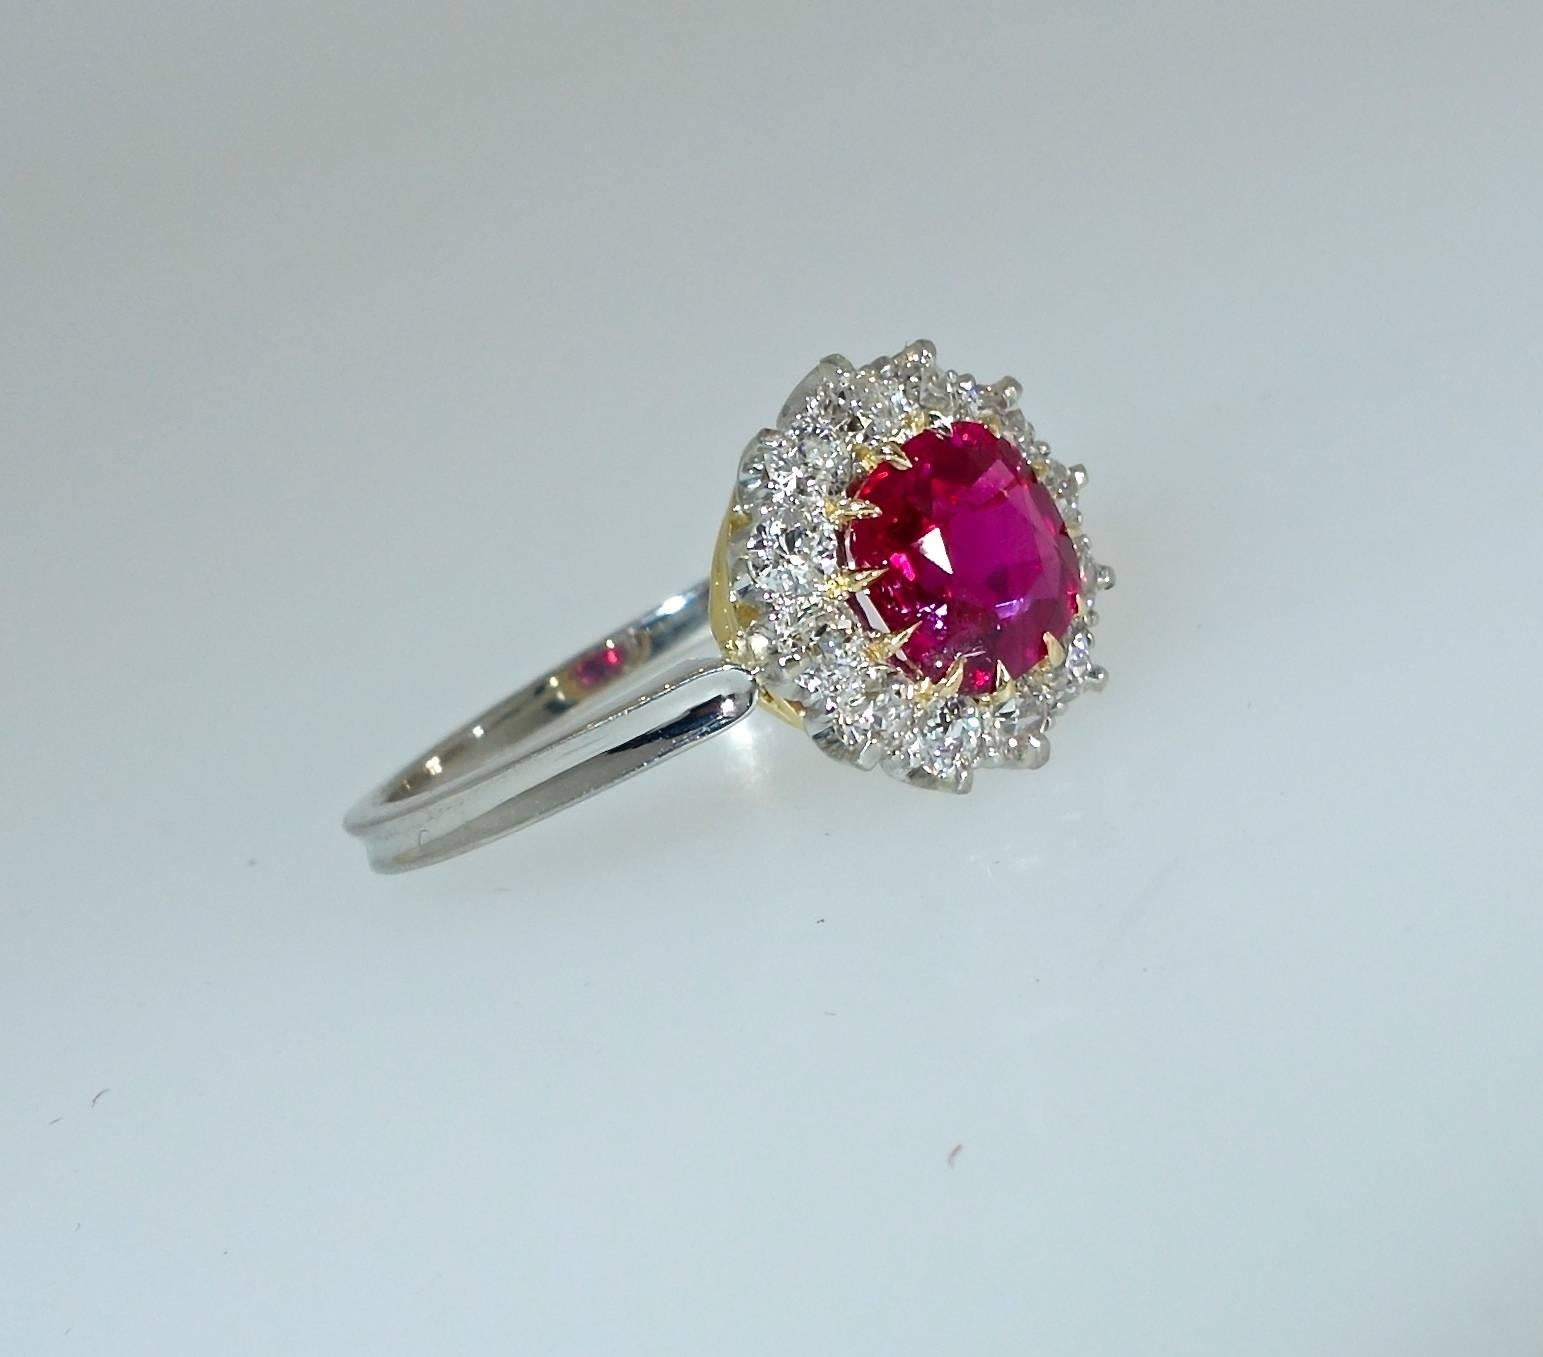 The center ruby weighs 1.3 cts. and displays the an exceptional color red which has made such stones from Burma extremely sought after. This bright ruby, which is very clean, held by 12 yellow gold prongs, is cut is an early mine cut - a cut usually